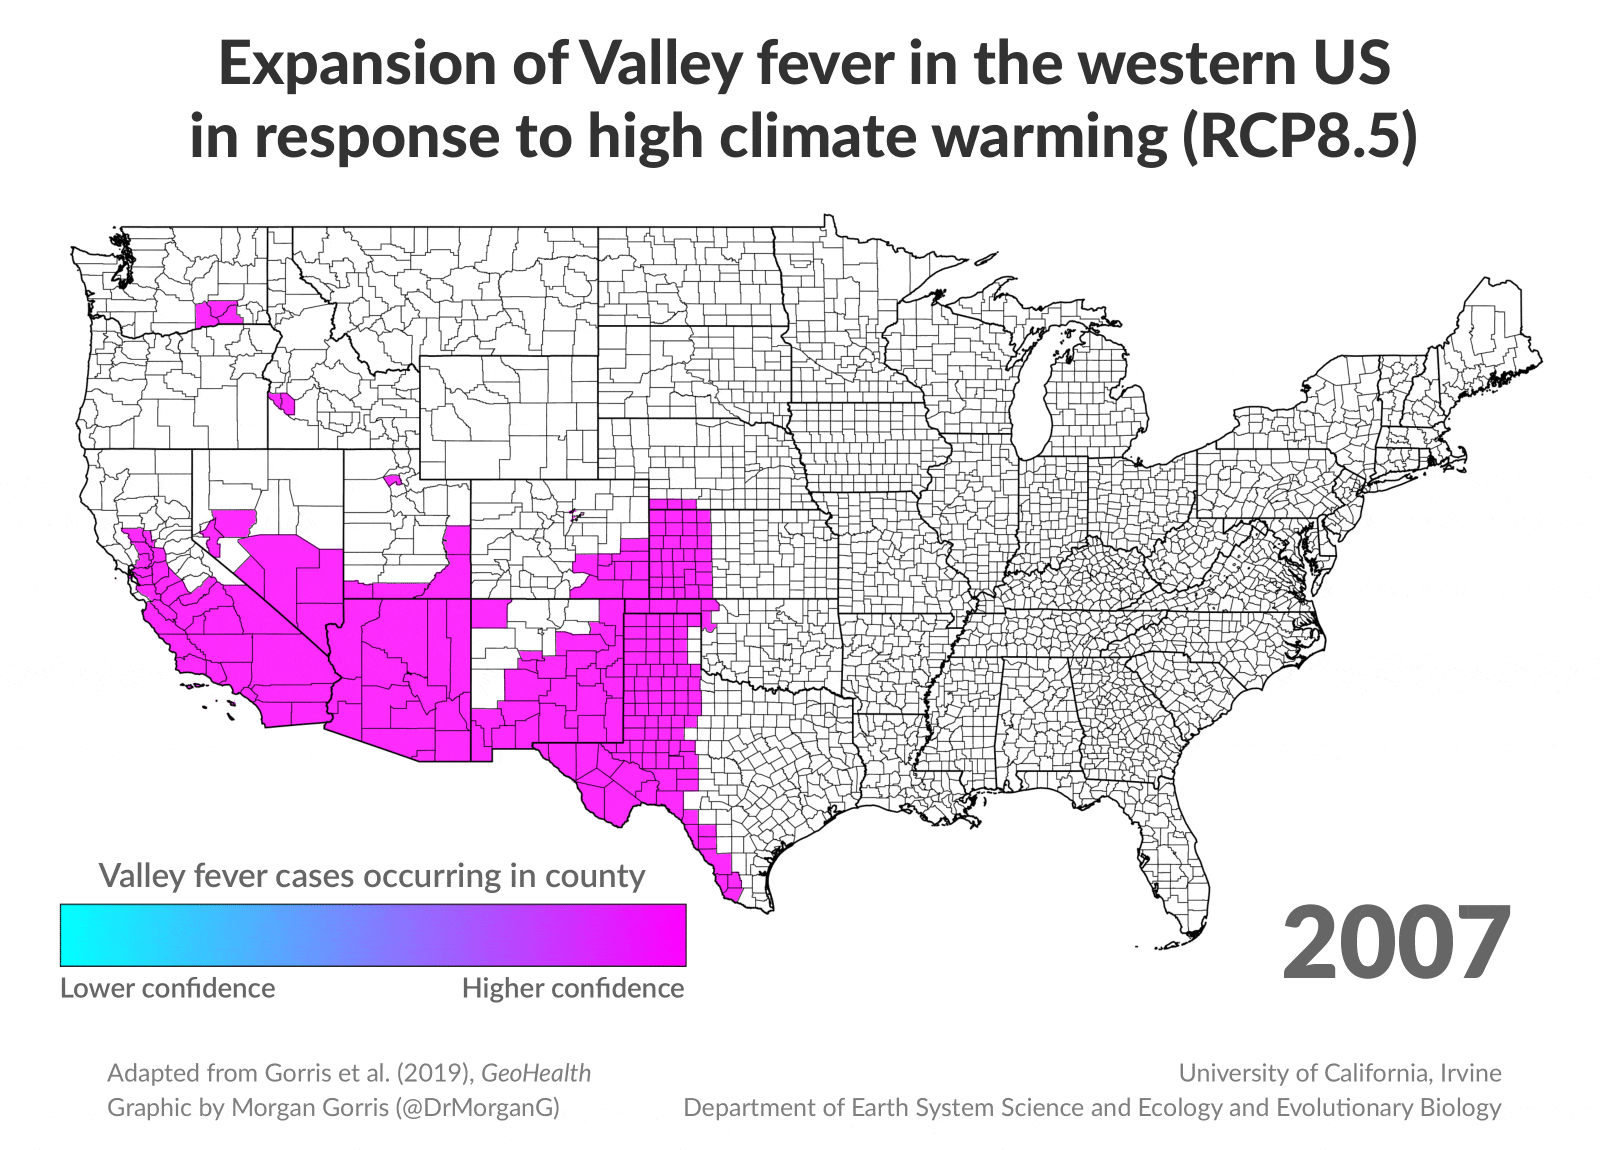 Researchers project how valley fever will spread. By 2095, much of the western U.S. will be considered endemic.